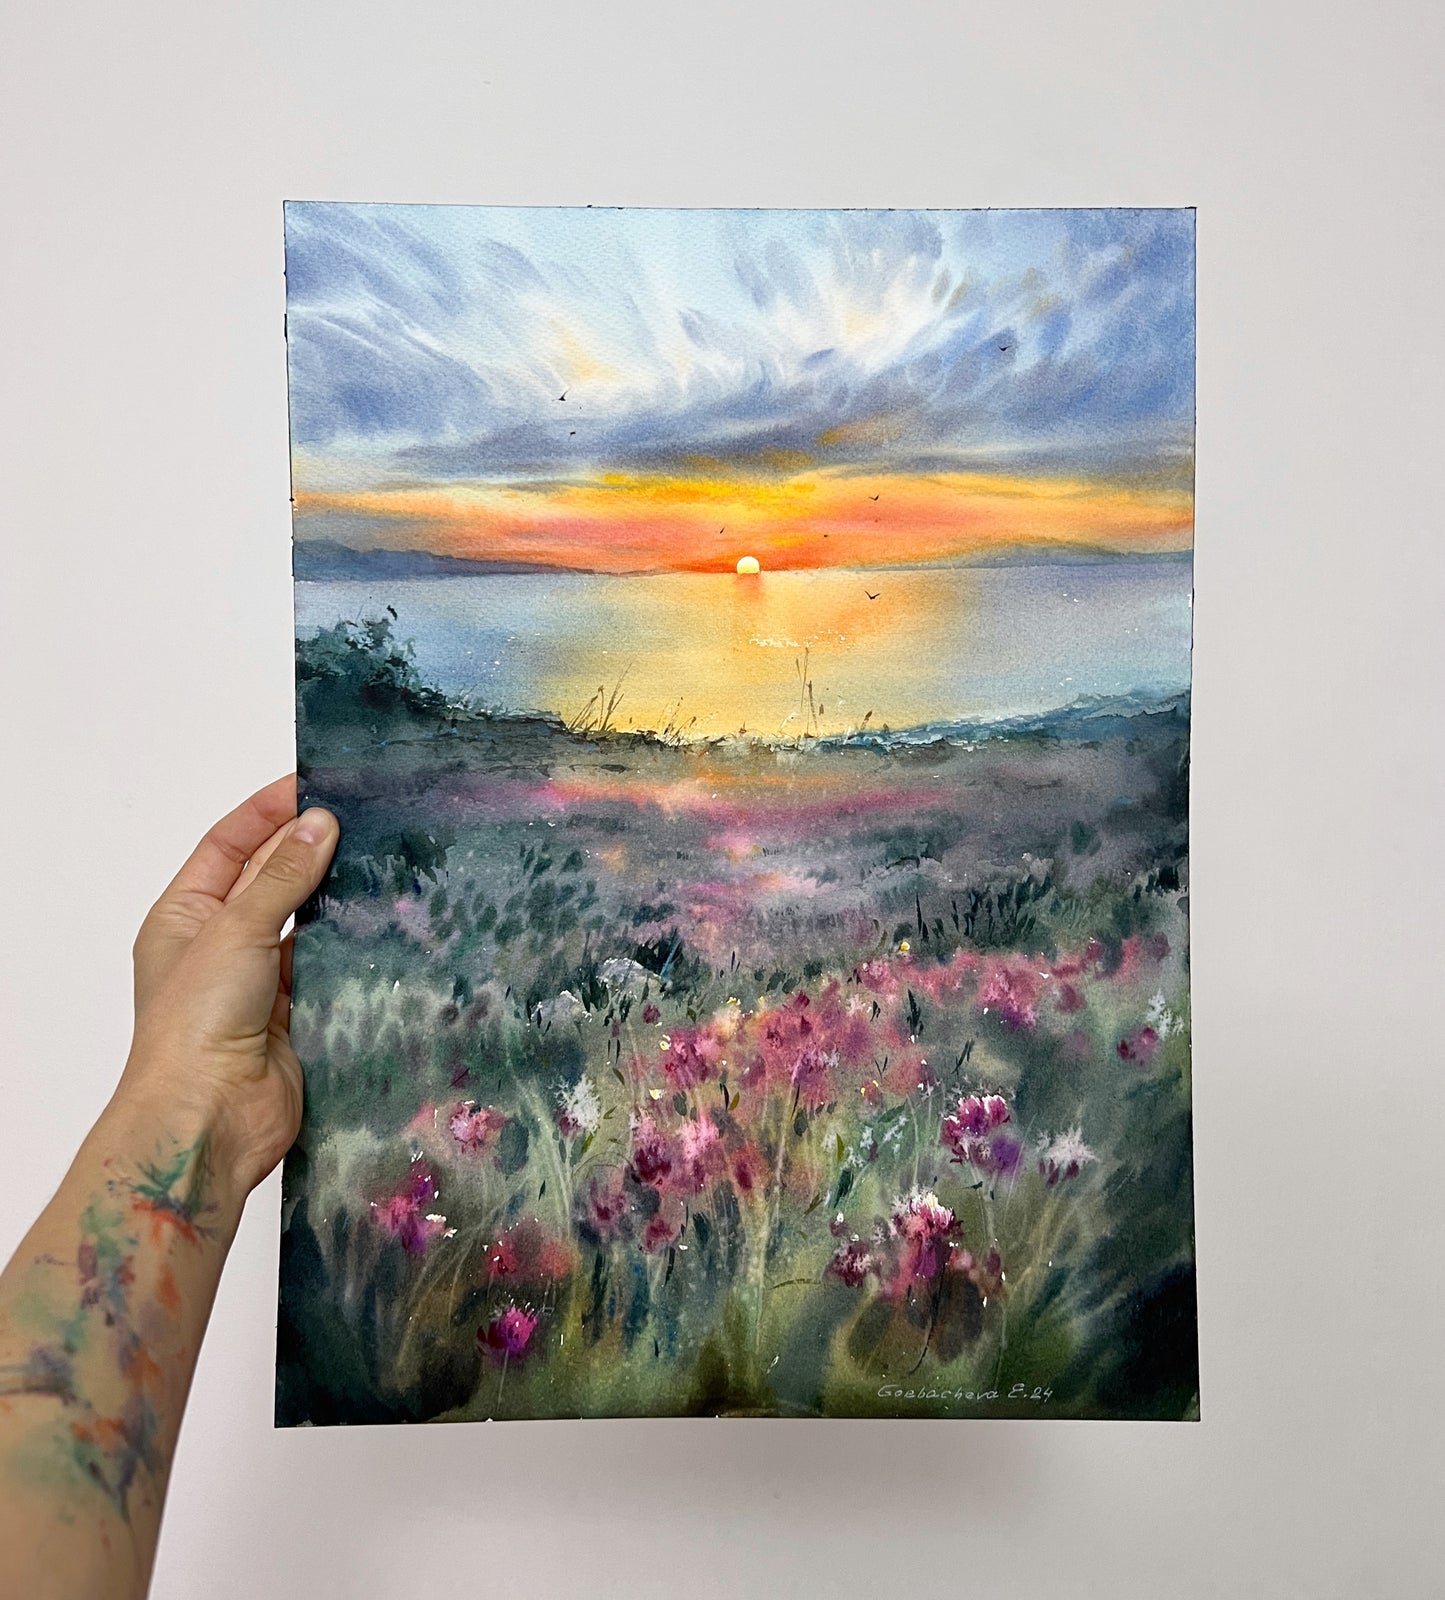 Original Watercolor Painting: Flowers and Sea at Sunset with Clover Field Art